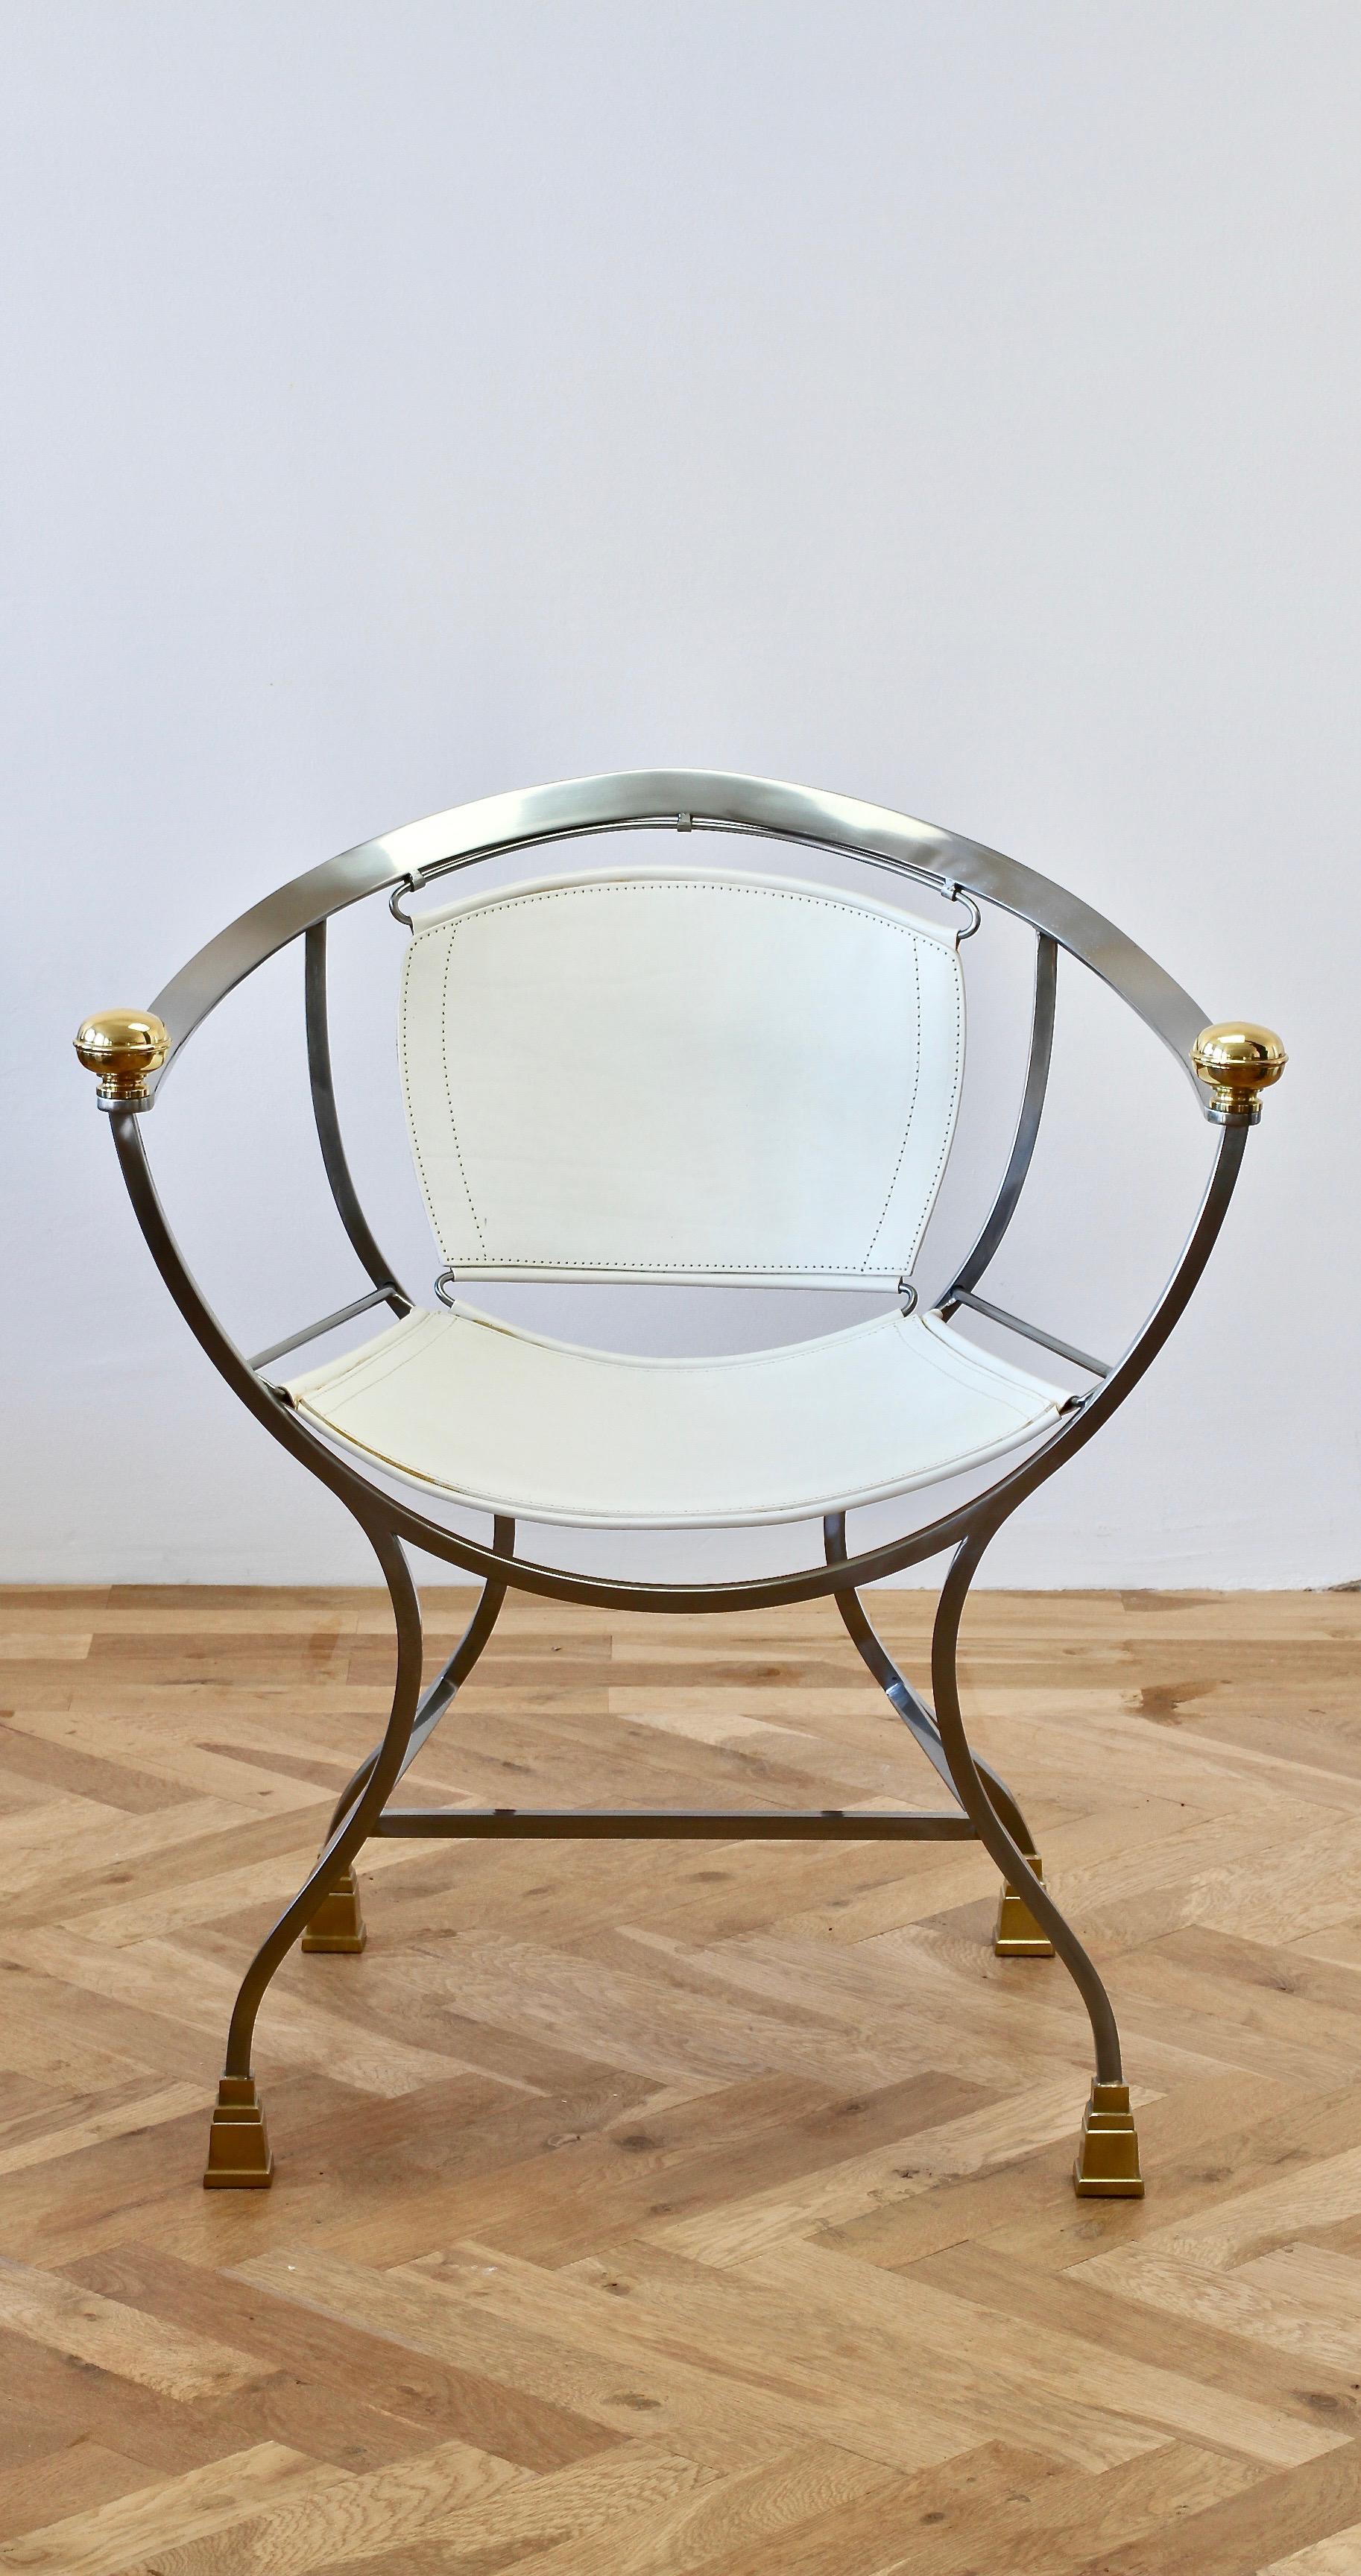 One of a set of four rare vintage 'Pompeii' armchairs or seats by Italian designer Alberto Orlandi, circa late 1970s-early 1980s. Made in Italy and featuring polished steel, solid cast brass feet and armrest details with white leather seat and